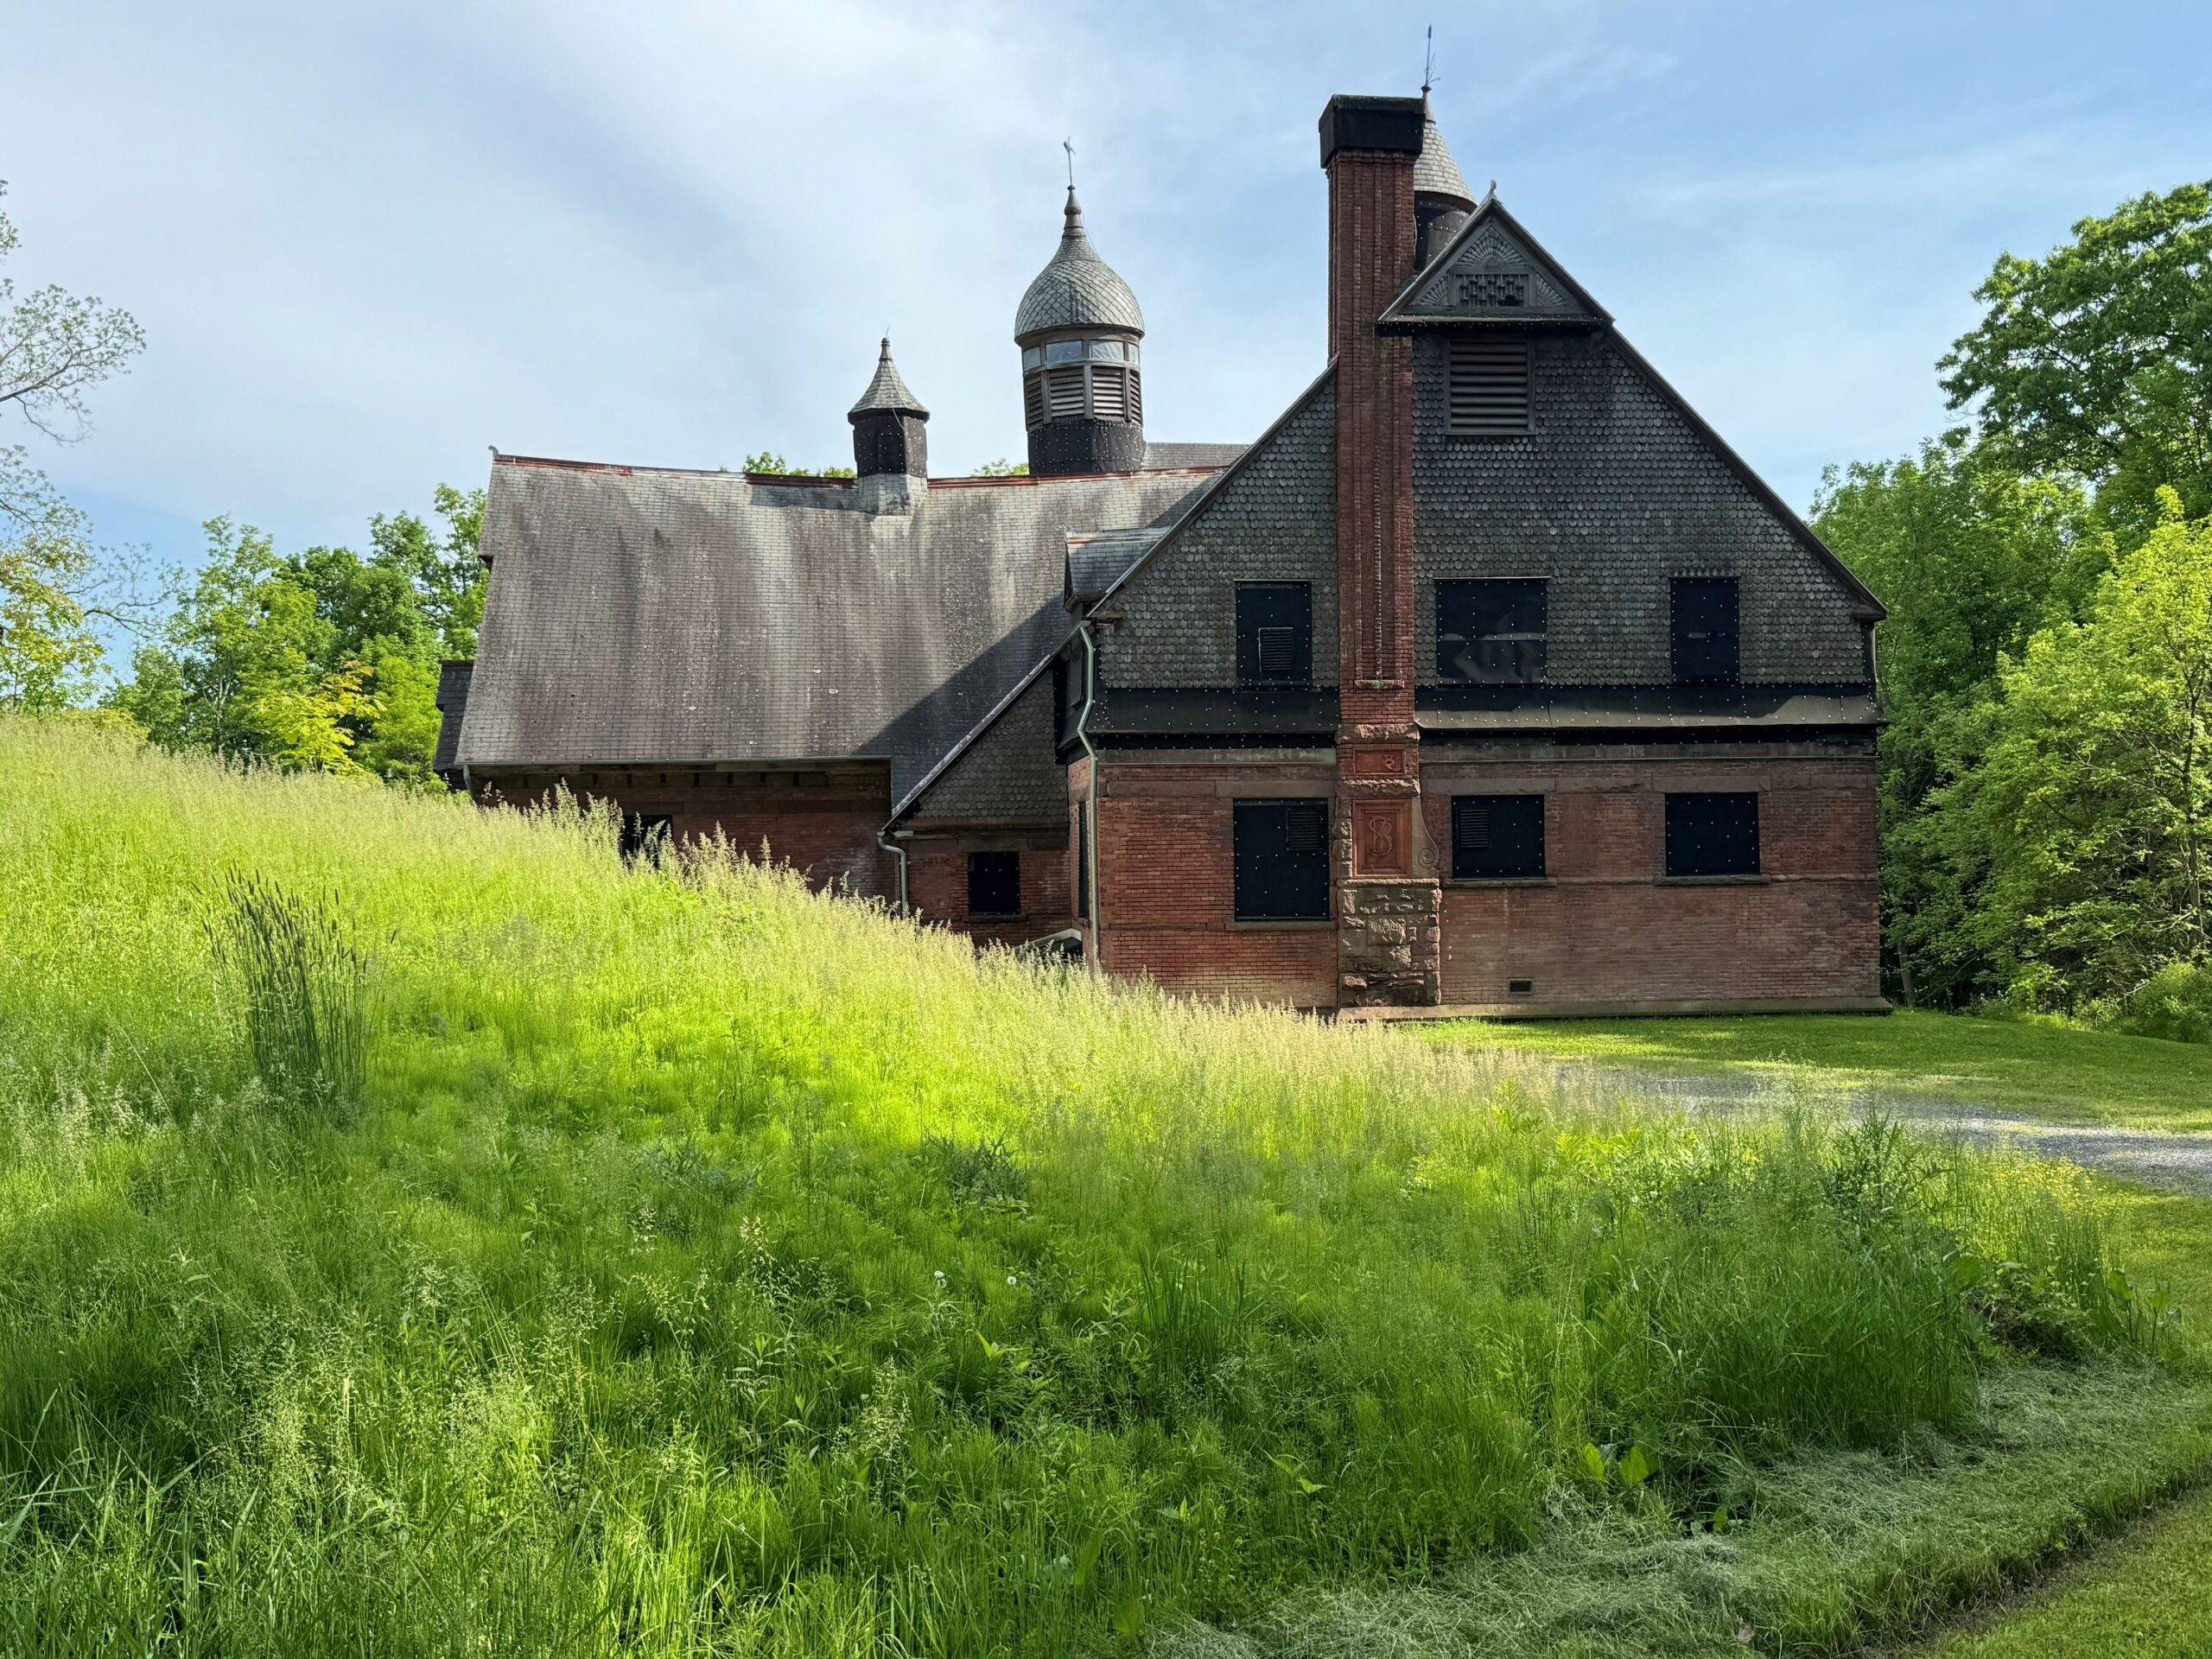 THE CARRIAGE HOUSE BECOMES THE FOCUS FOR ONGOING RESTORATION